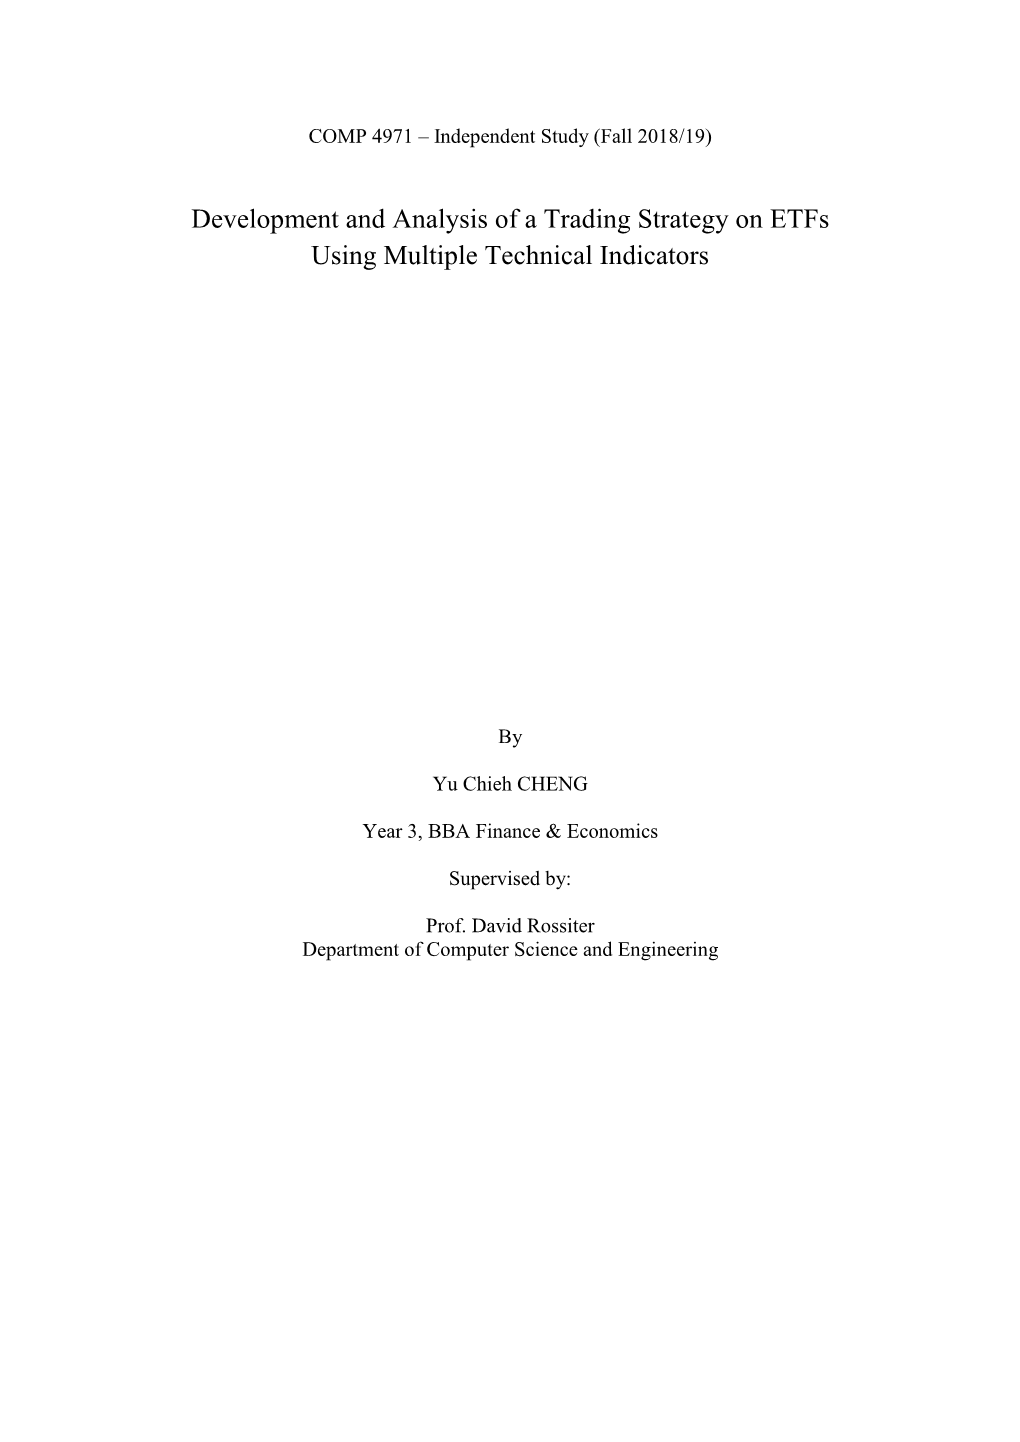 Development and Analysis of a Trading Strategy on Etfs Using Multiple Technical Indicators